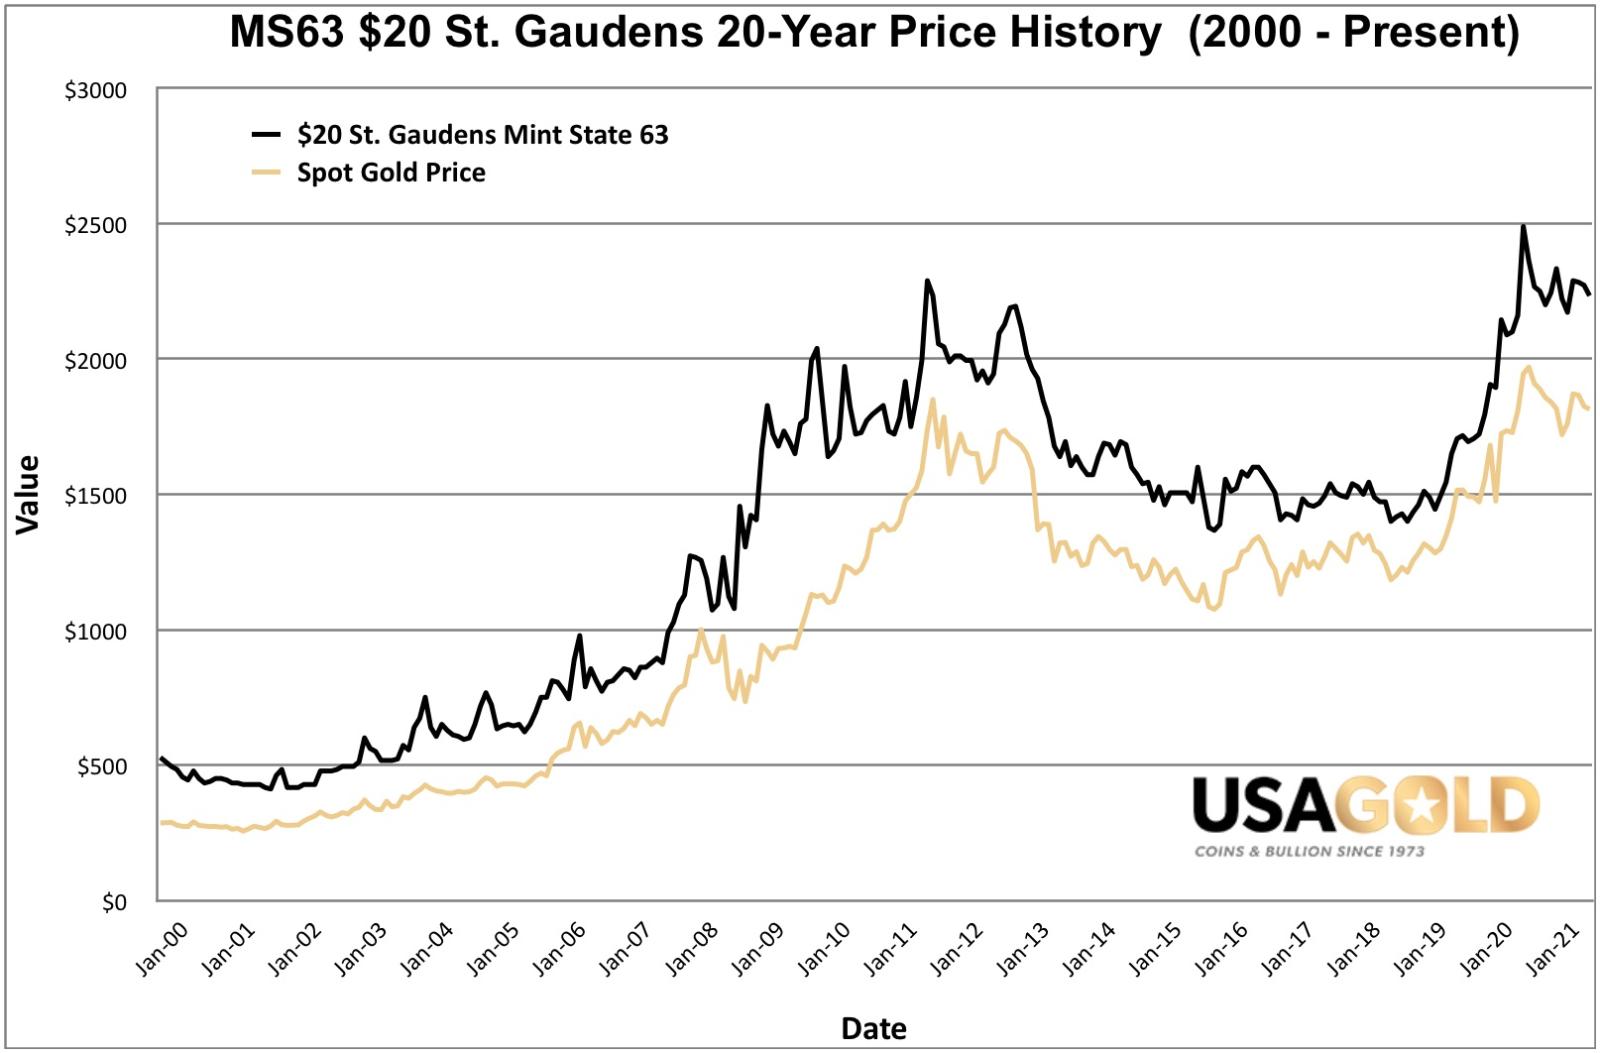 Graph of the price performance of MS63 $20 St. Gaudens since year 2000. Also graphed is the spot price of gold over the same period.